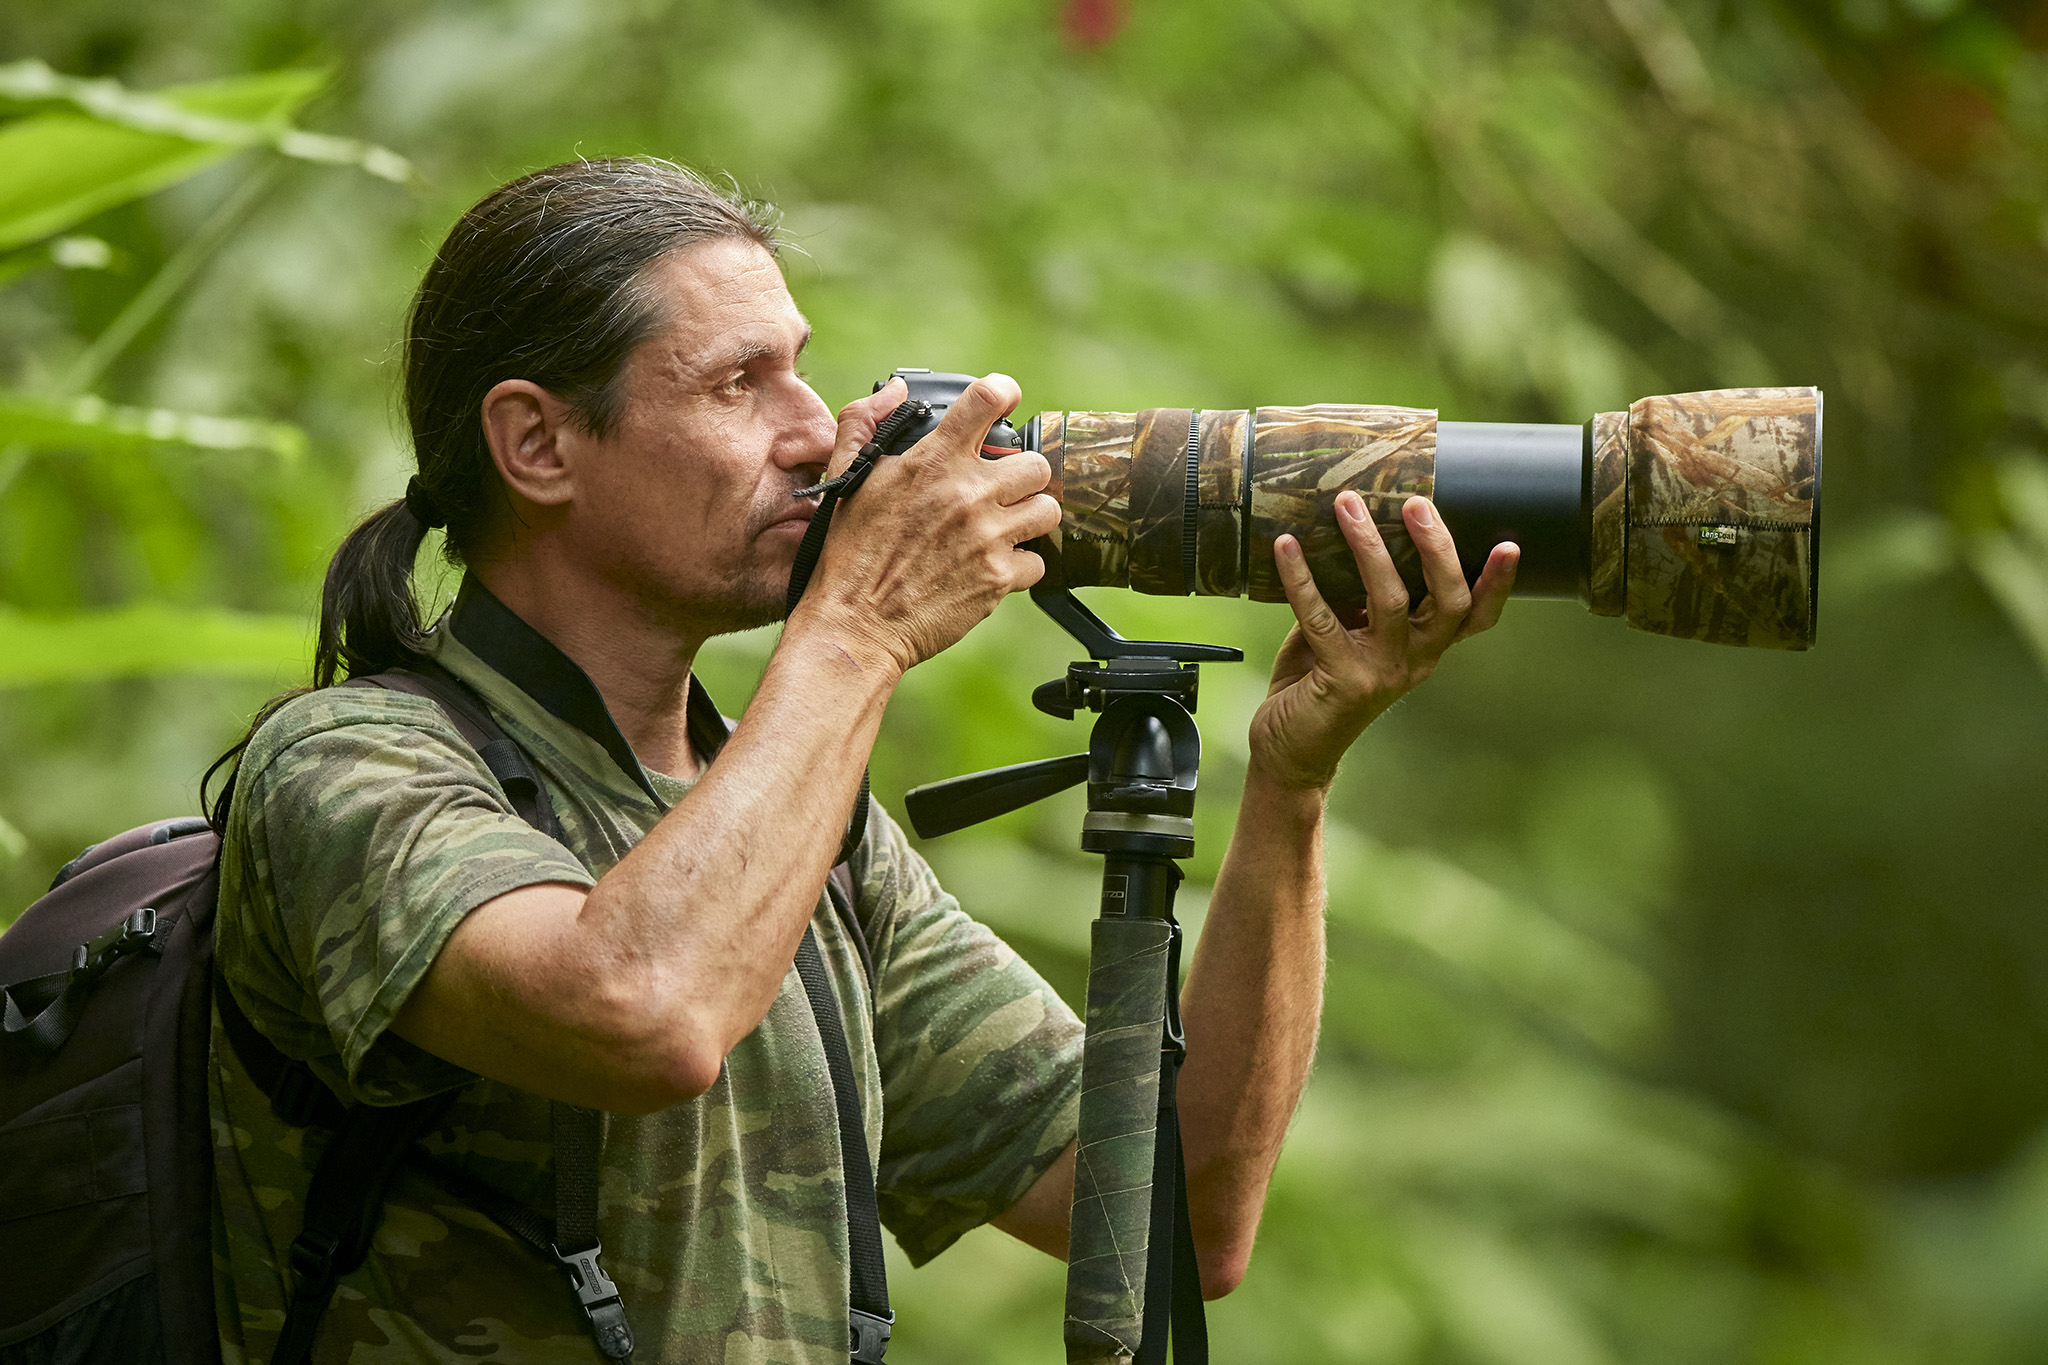 Nikon D500 & 200-500mm f/5.6: The Ultimate Budget Wildlife Combo